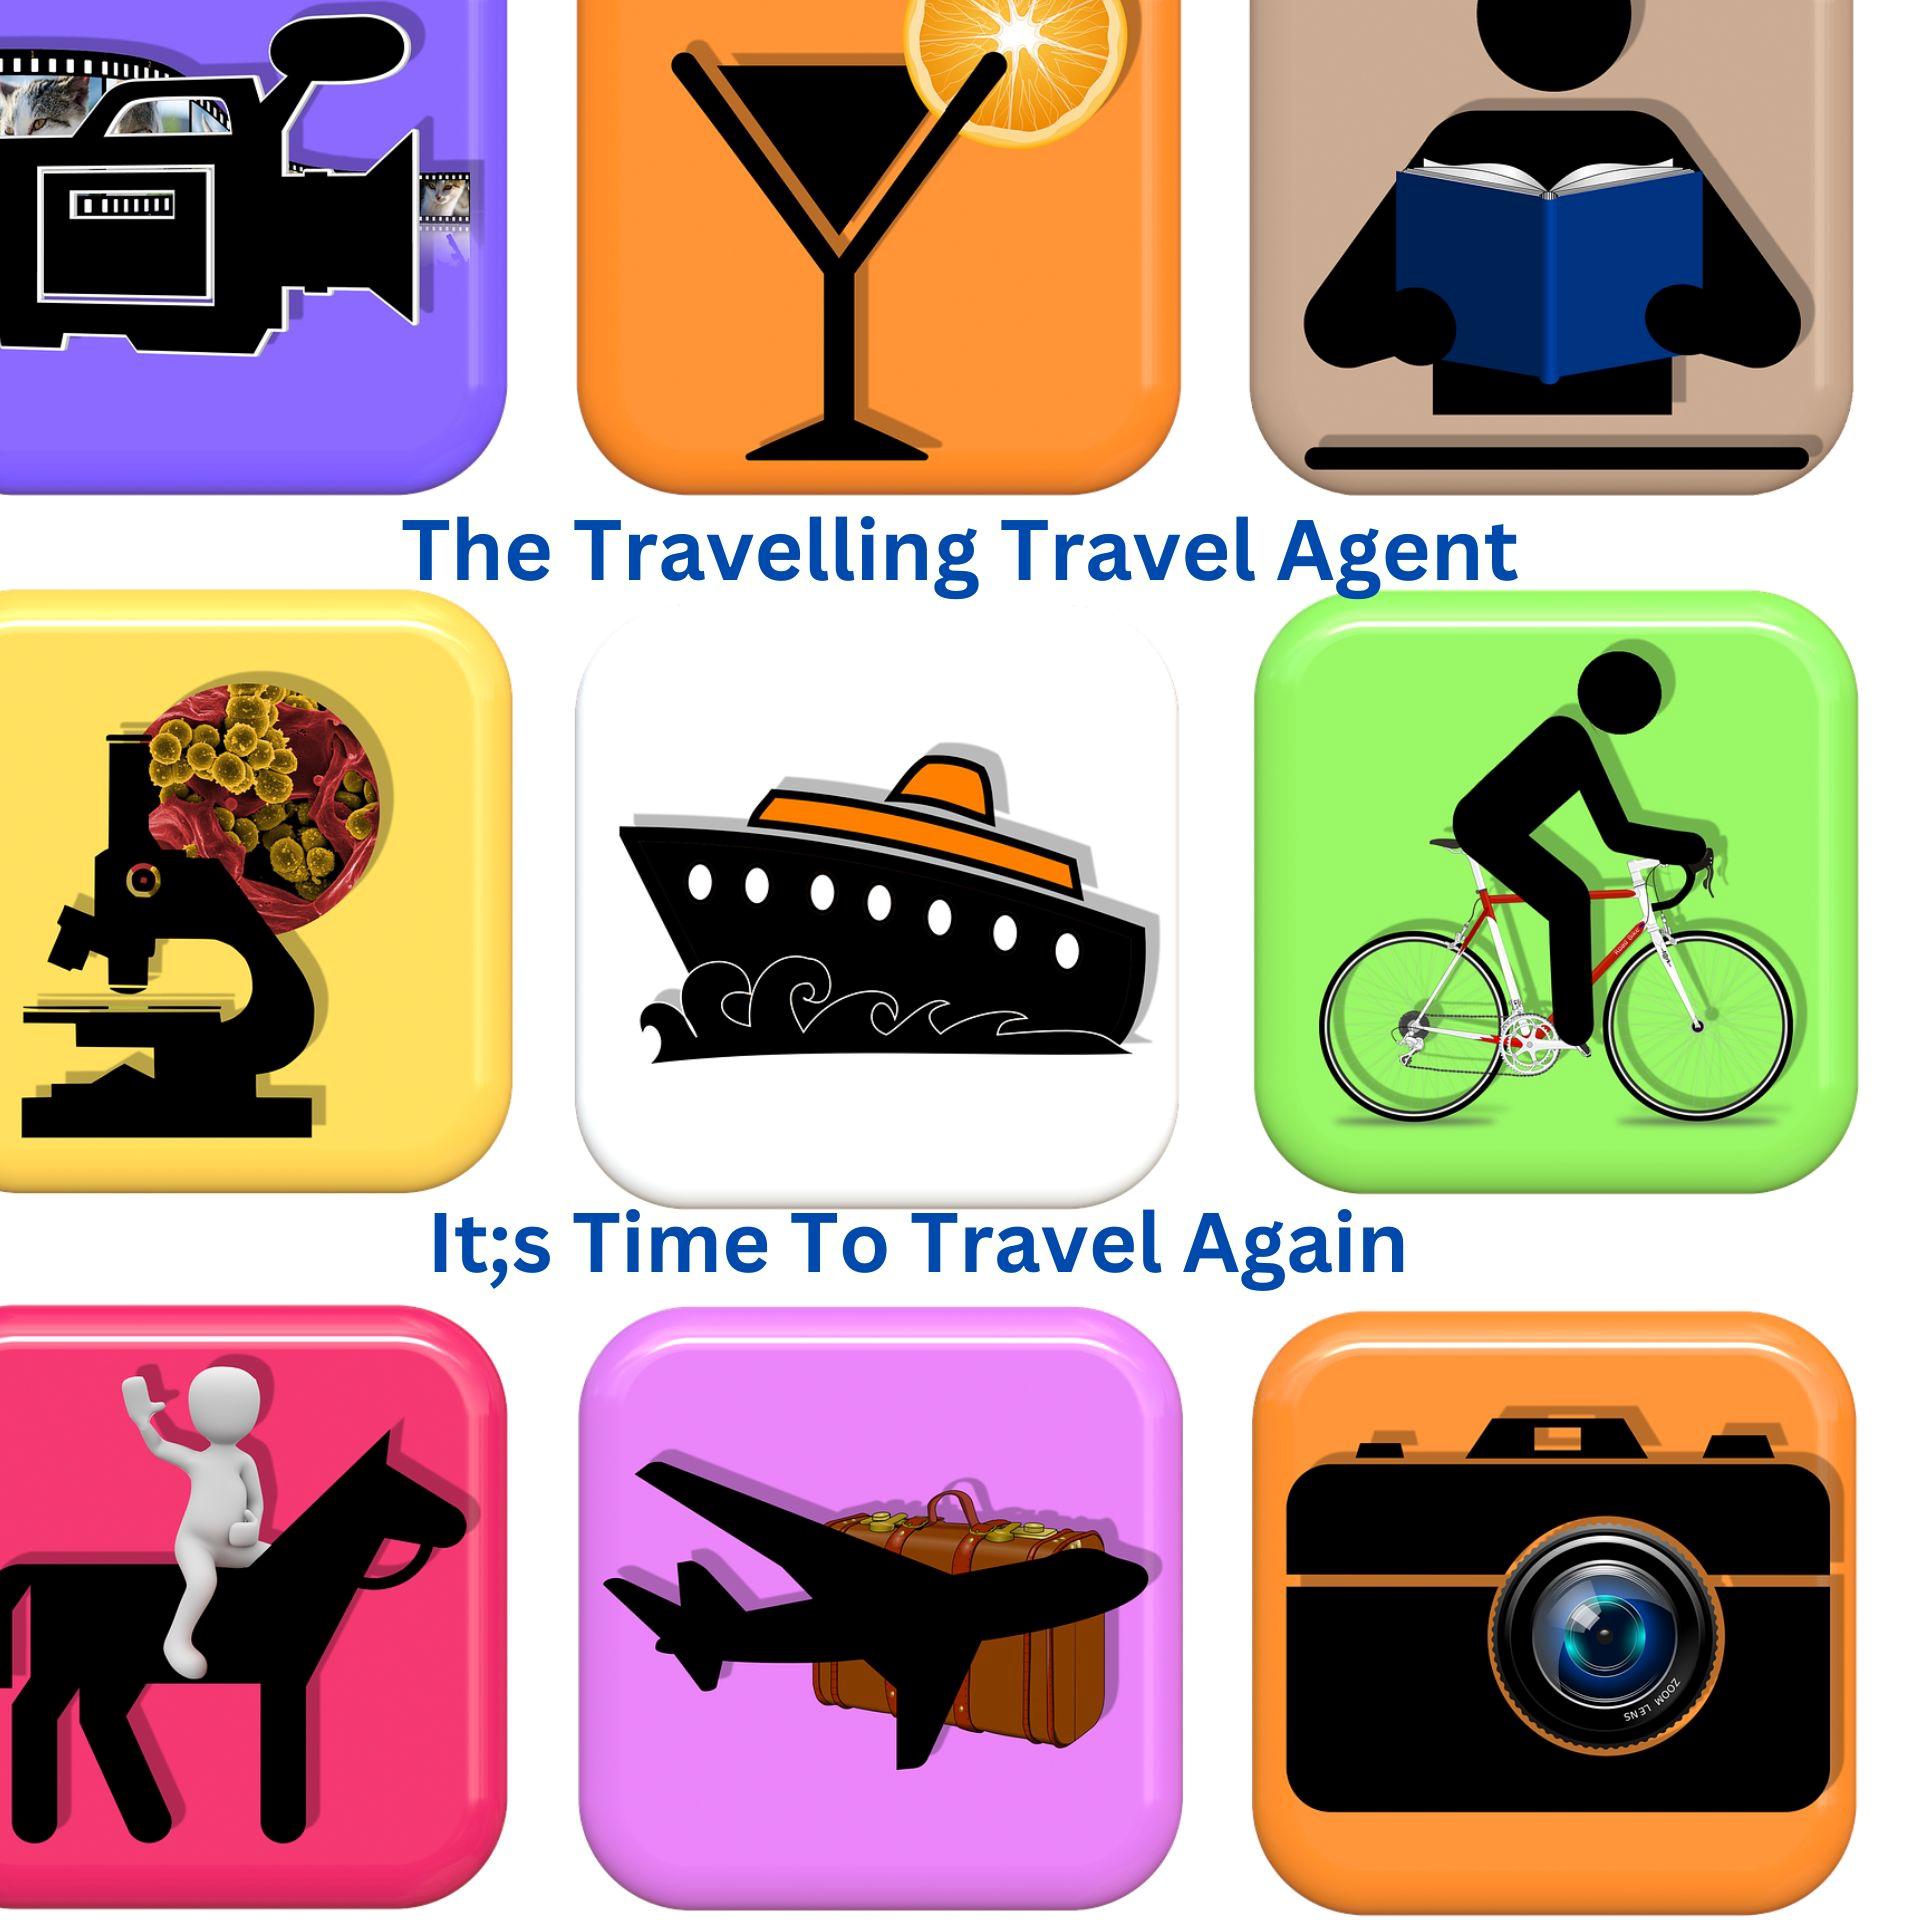 The Travelling Travel Agent